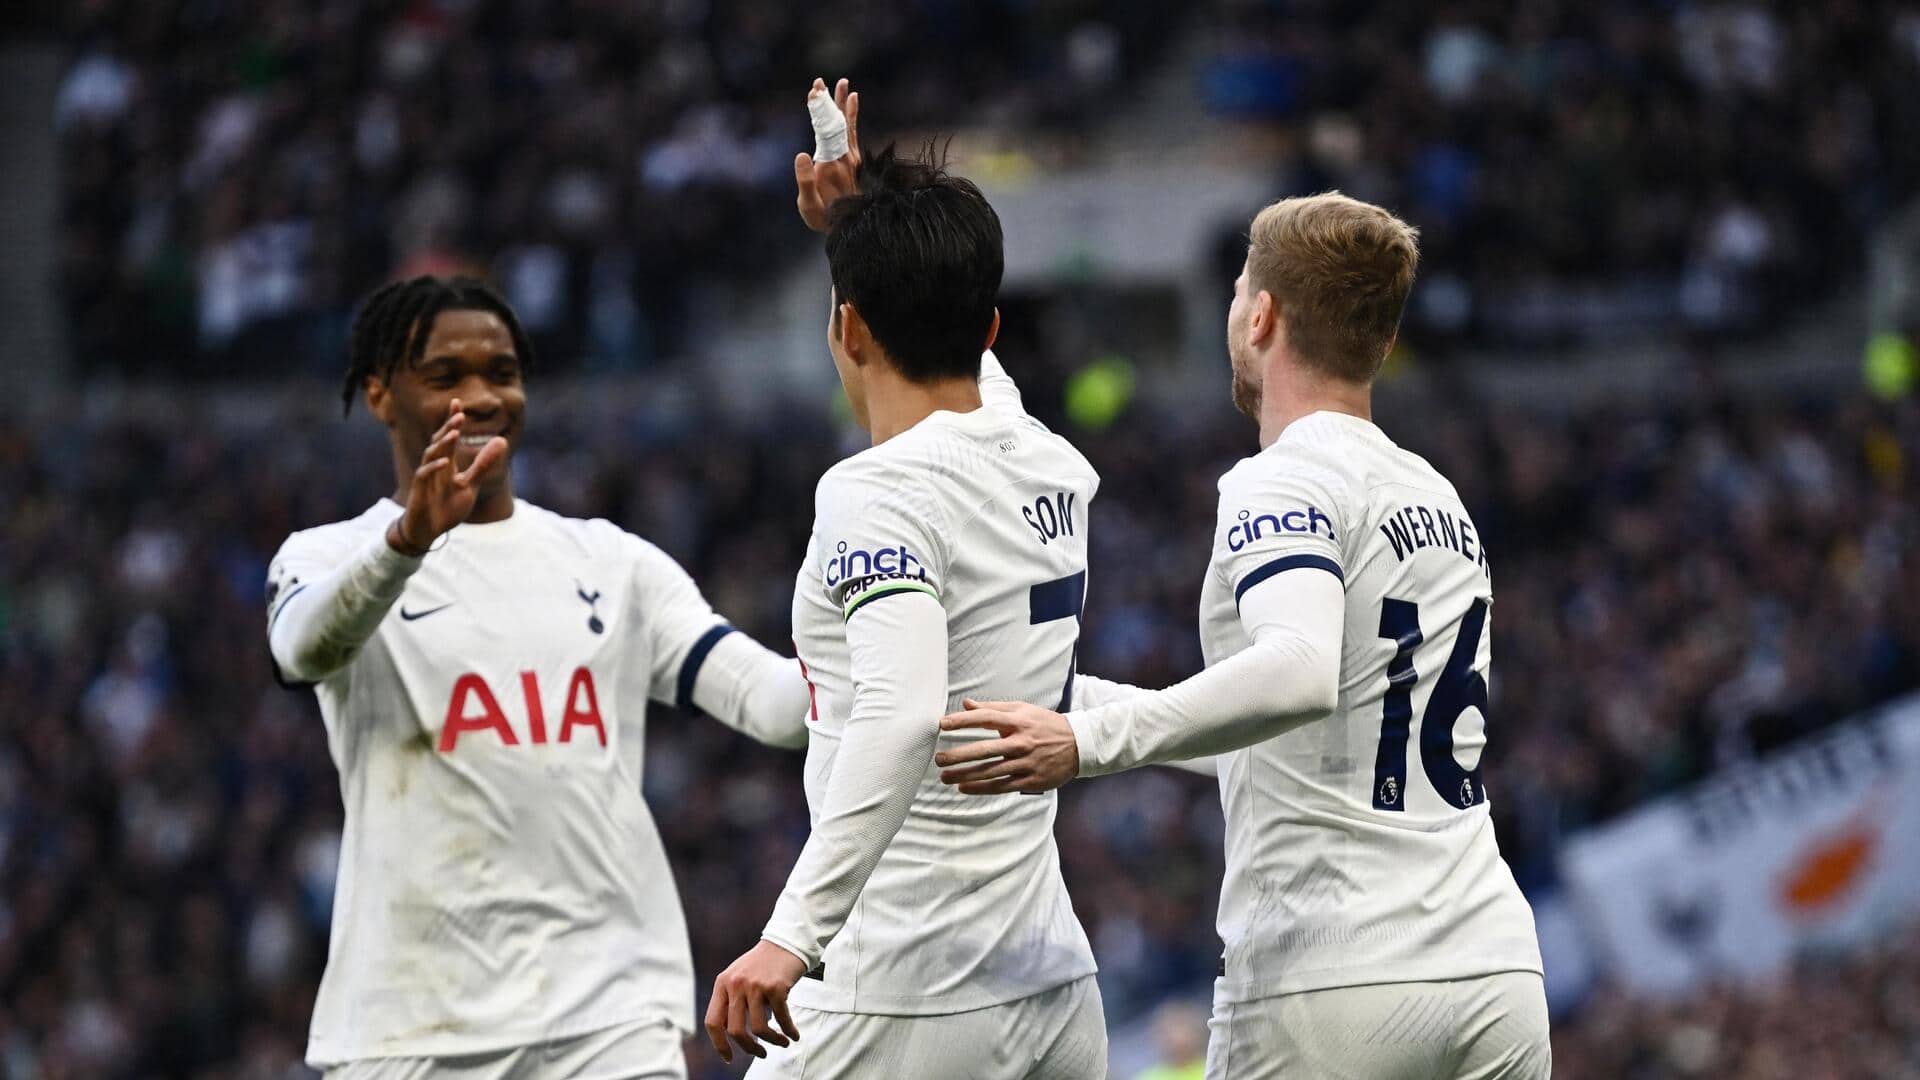 Tottenham Hotspur move to fourth by cutting down Nottingham Forest